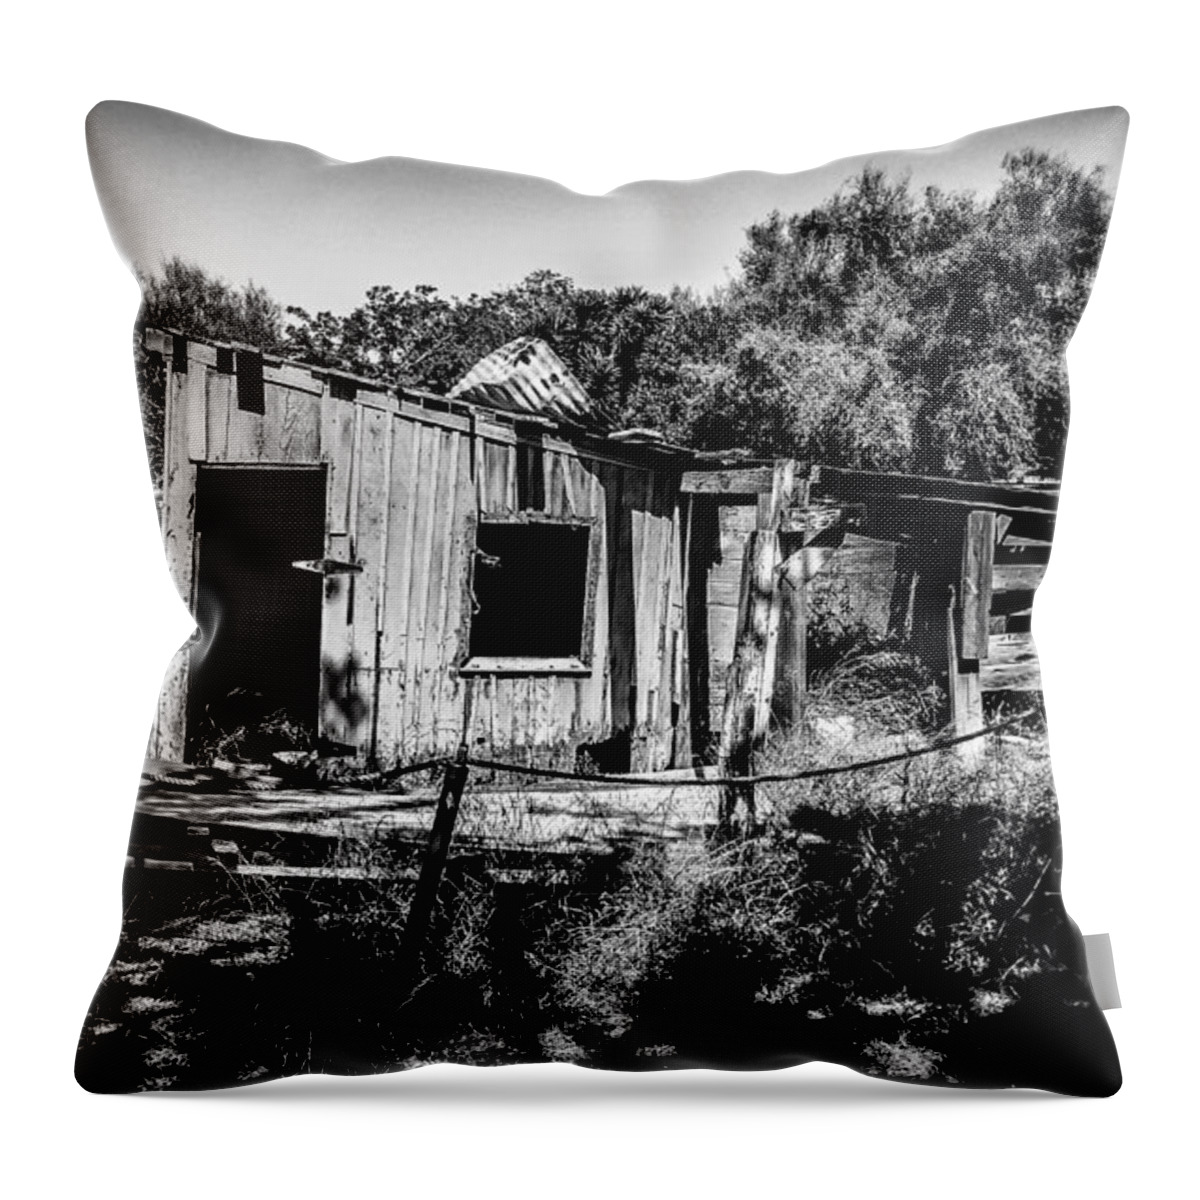 California Throw Pillow featuring the photograph Abandoned Shed by Pamela Newcomb